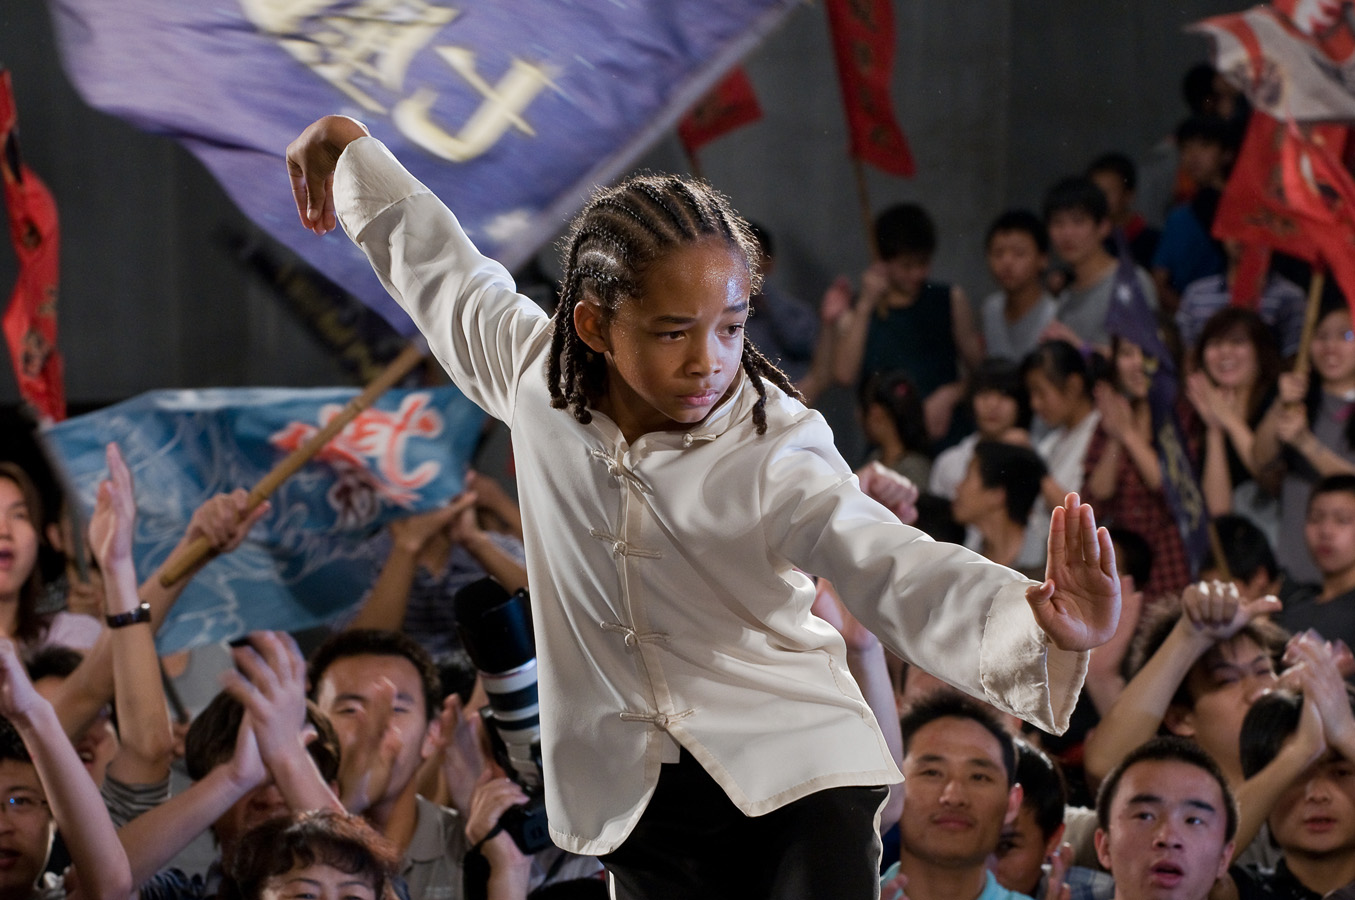 'The Karate Kid' Movie Review